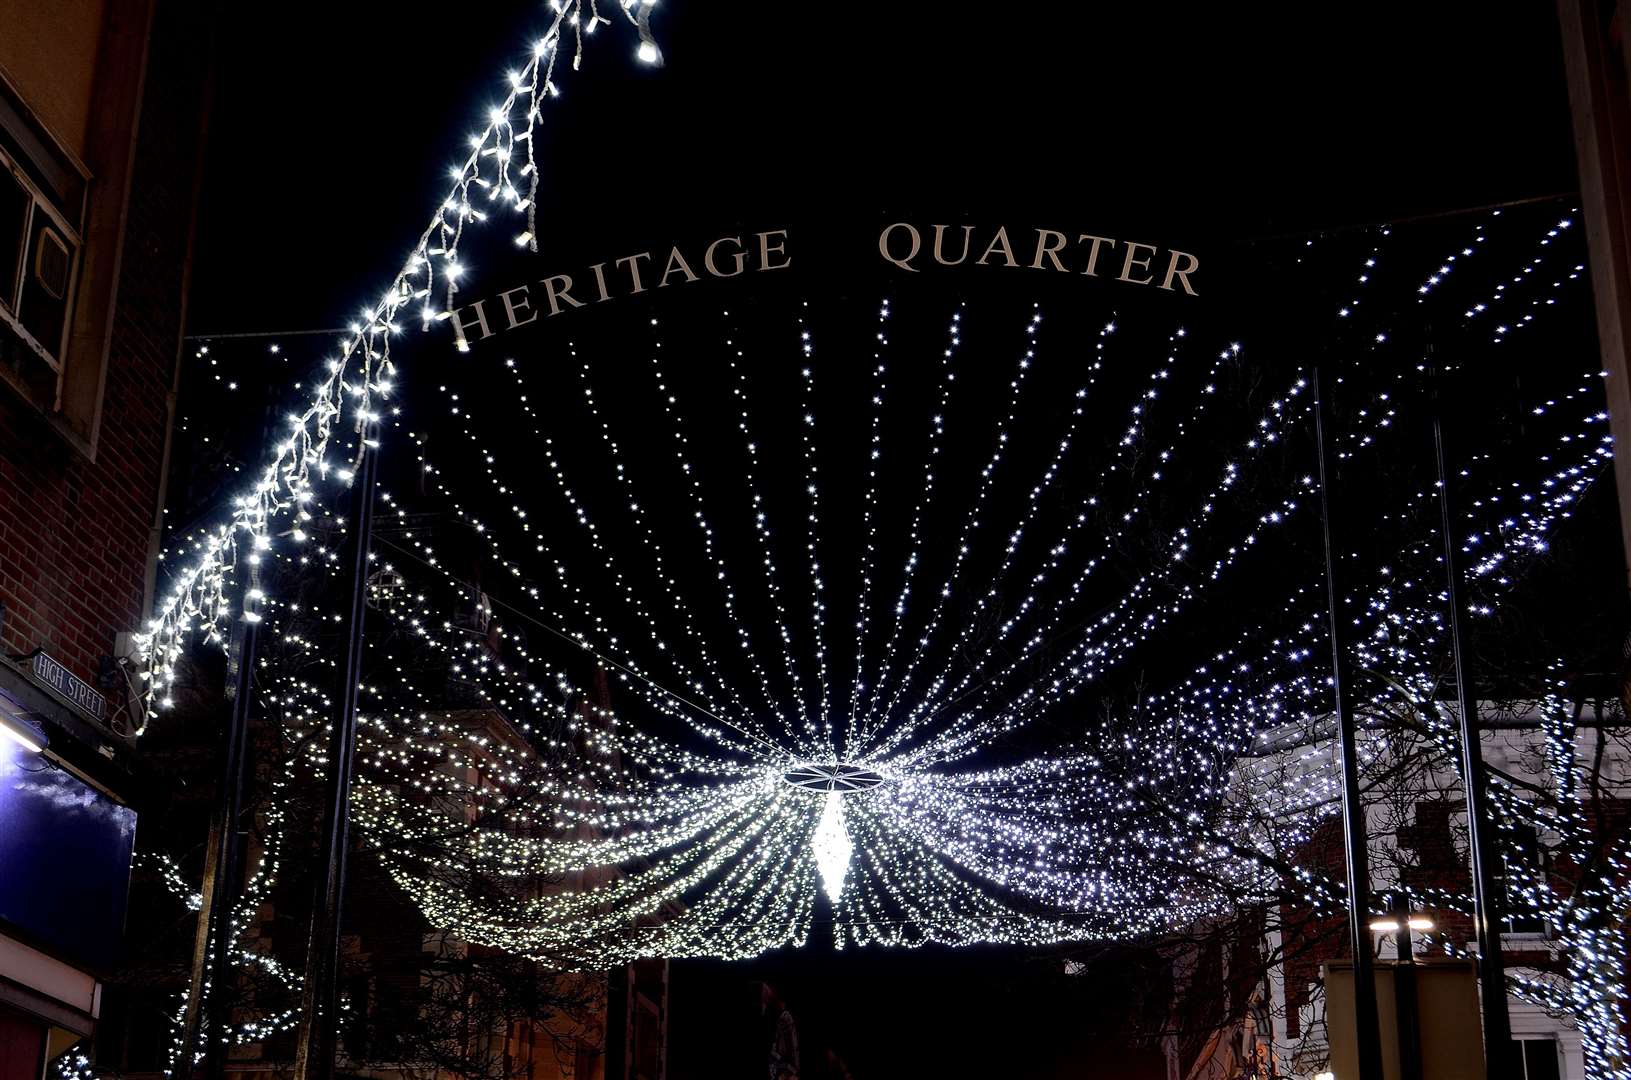 The Christmas lights in the Heritage Quarter, picture Jason Arthur (5484435)